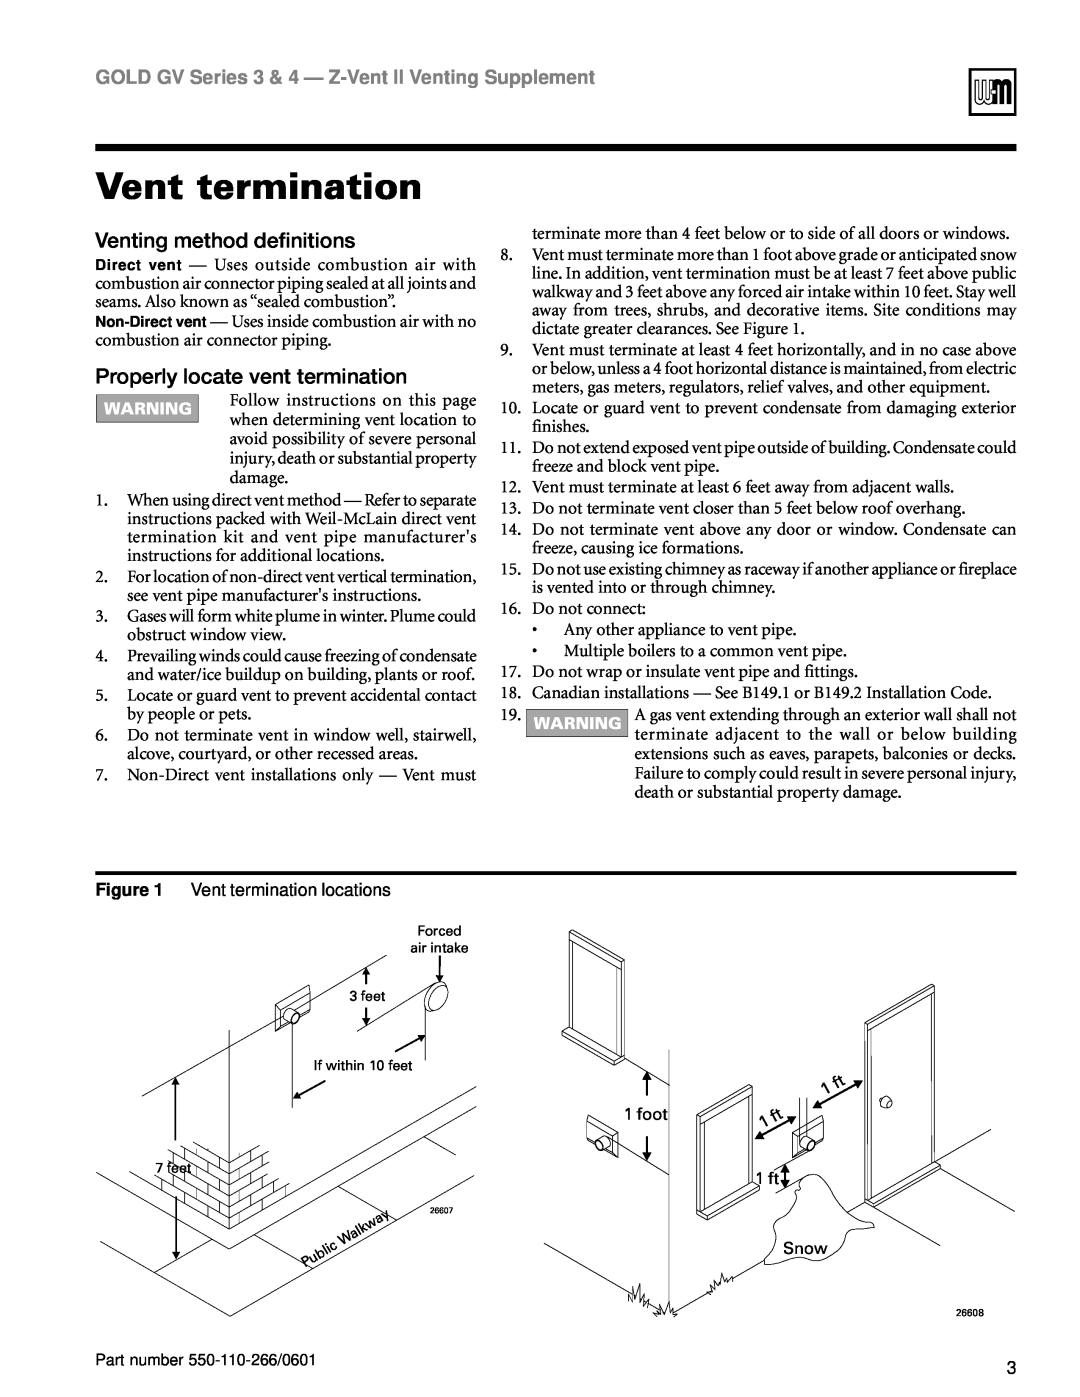 Weil-McLain GV Series 4, GV Series 3 manual Vent termination, Venting method definitions, Properly locate vent termination 